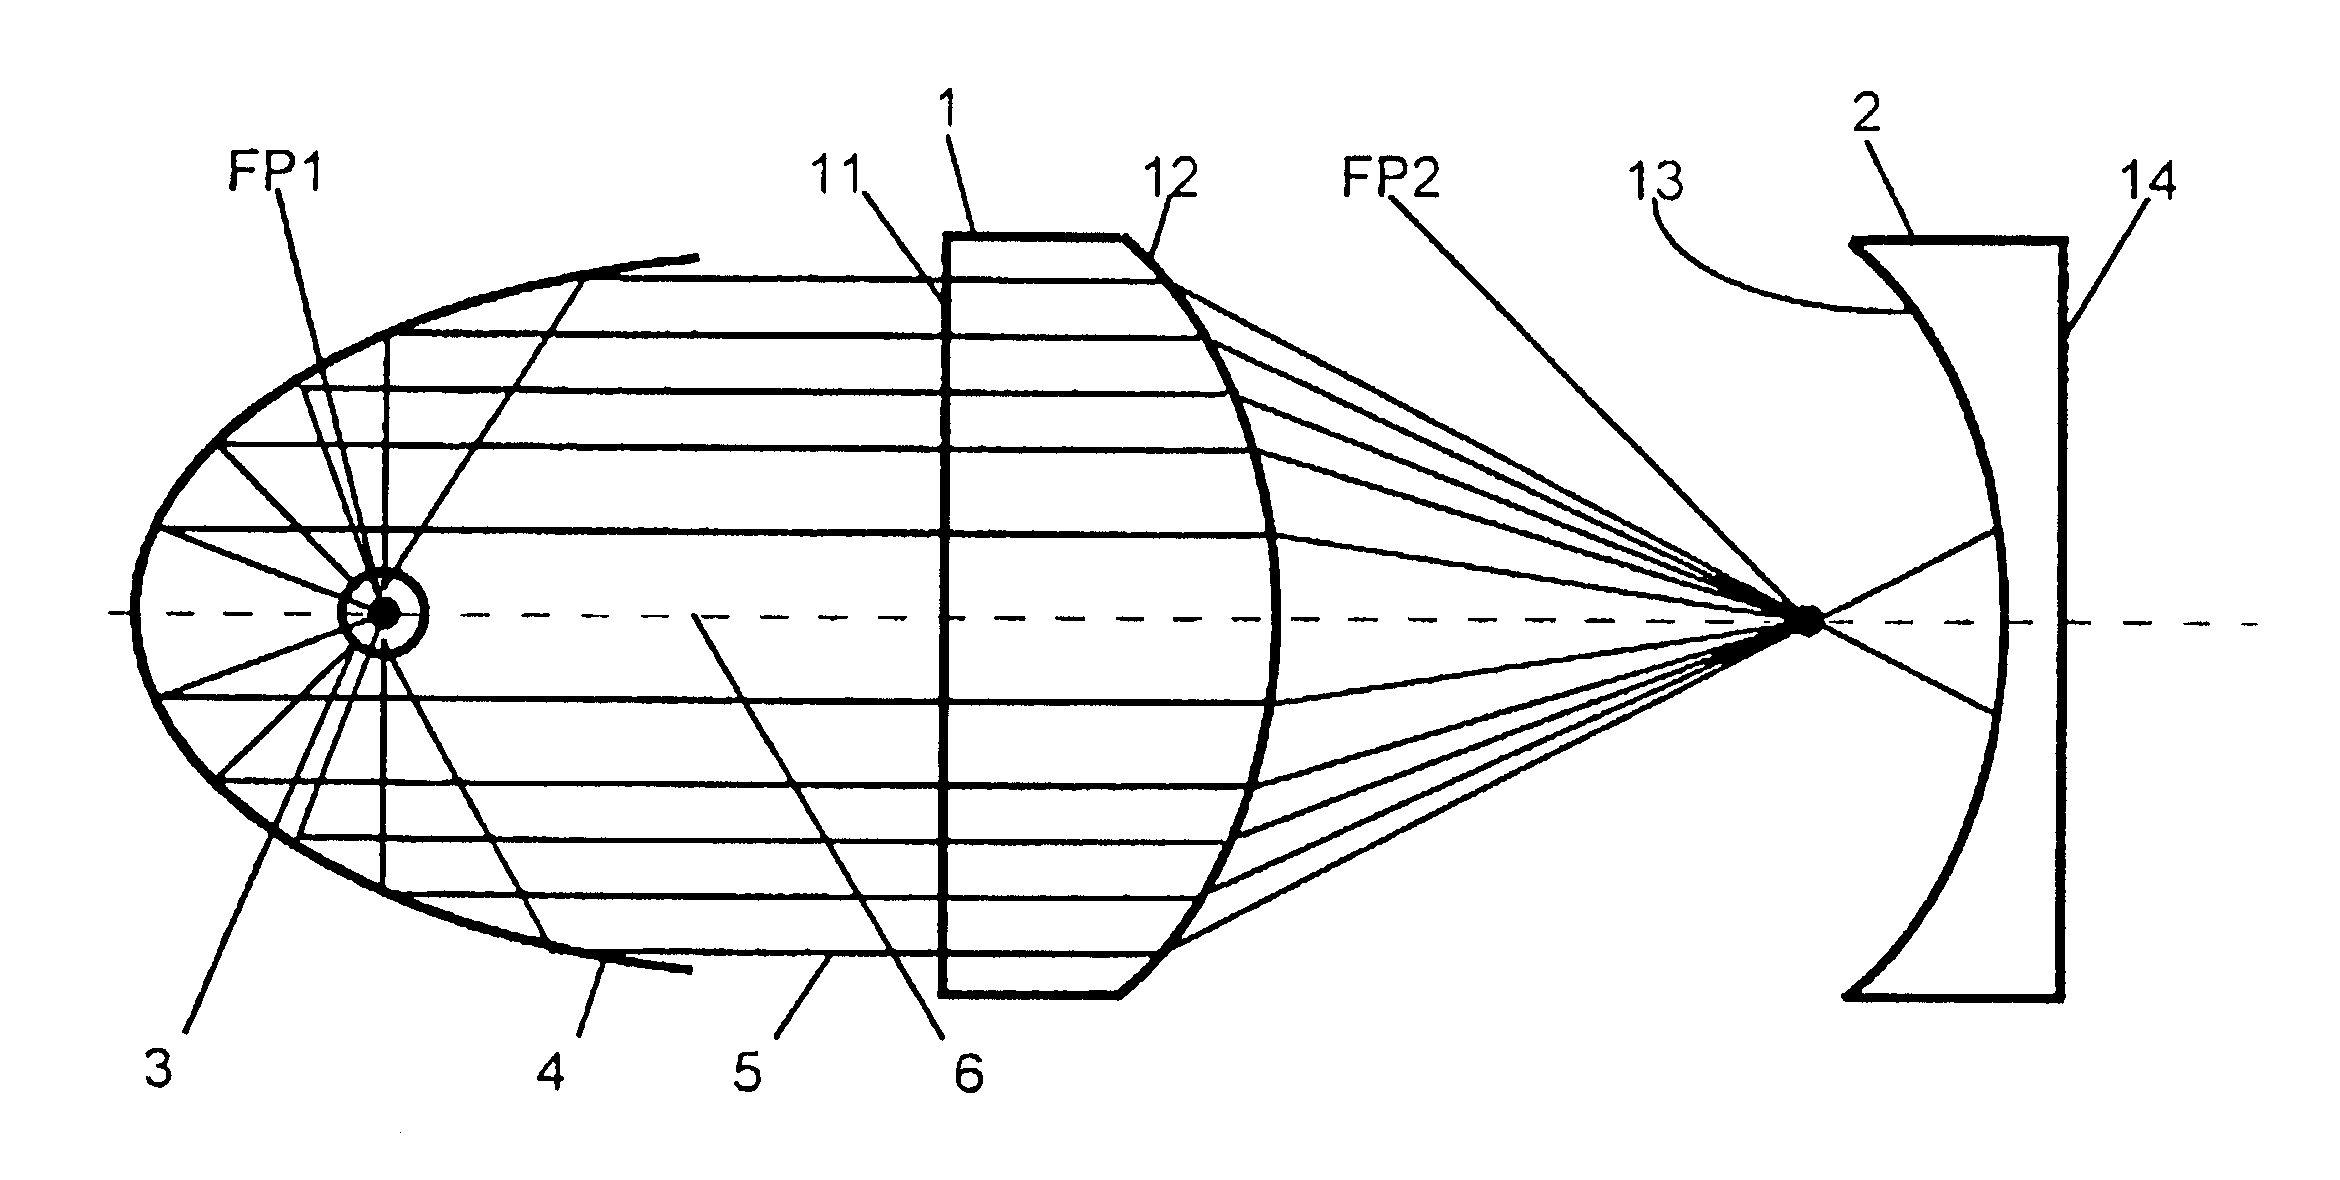 Zoomable beamspreader with matched optical surfaces for non-imaging illumination applications